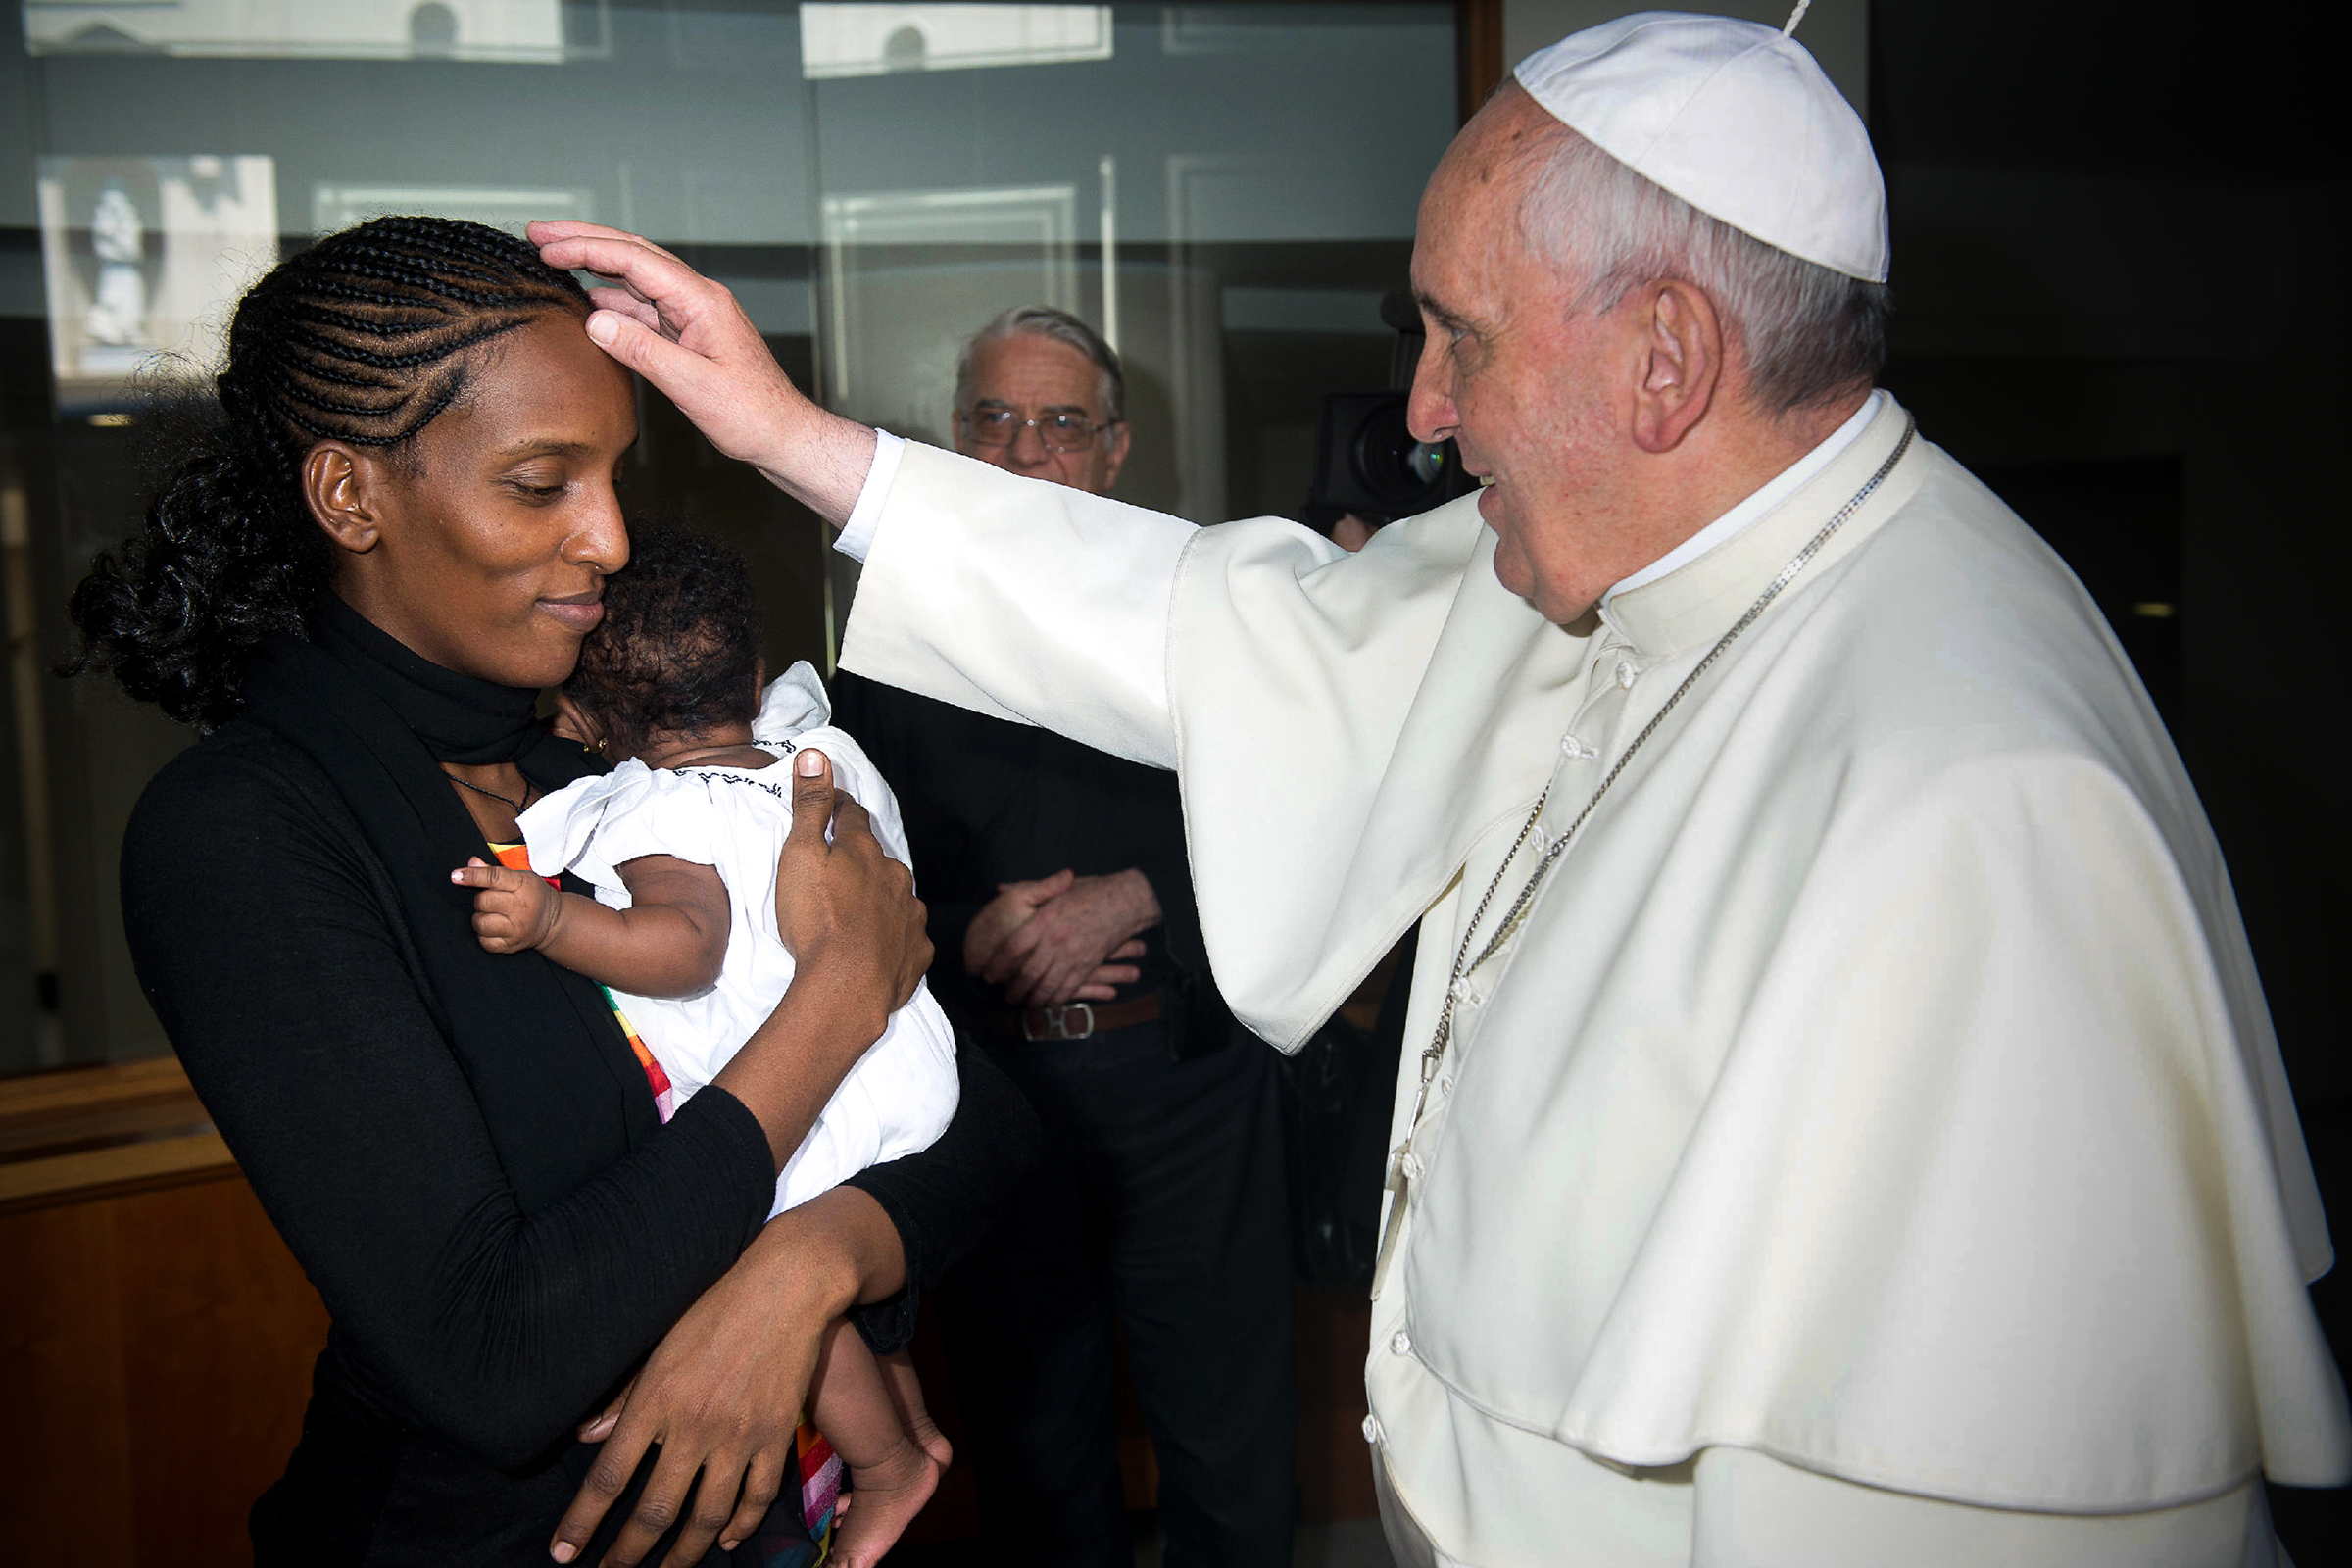 Pope Francis blesses Sudanese Christian Meriam Yahia Ibrahim Ishag and her daughter Maya during a private audience at the Vatican. Photo by L’Osservatore Romano via AFP